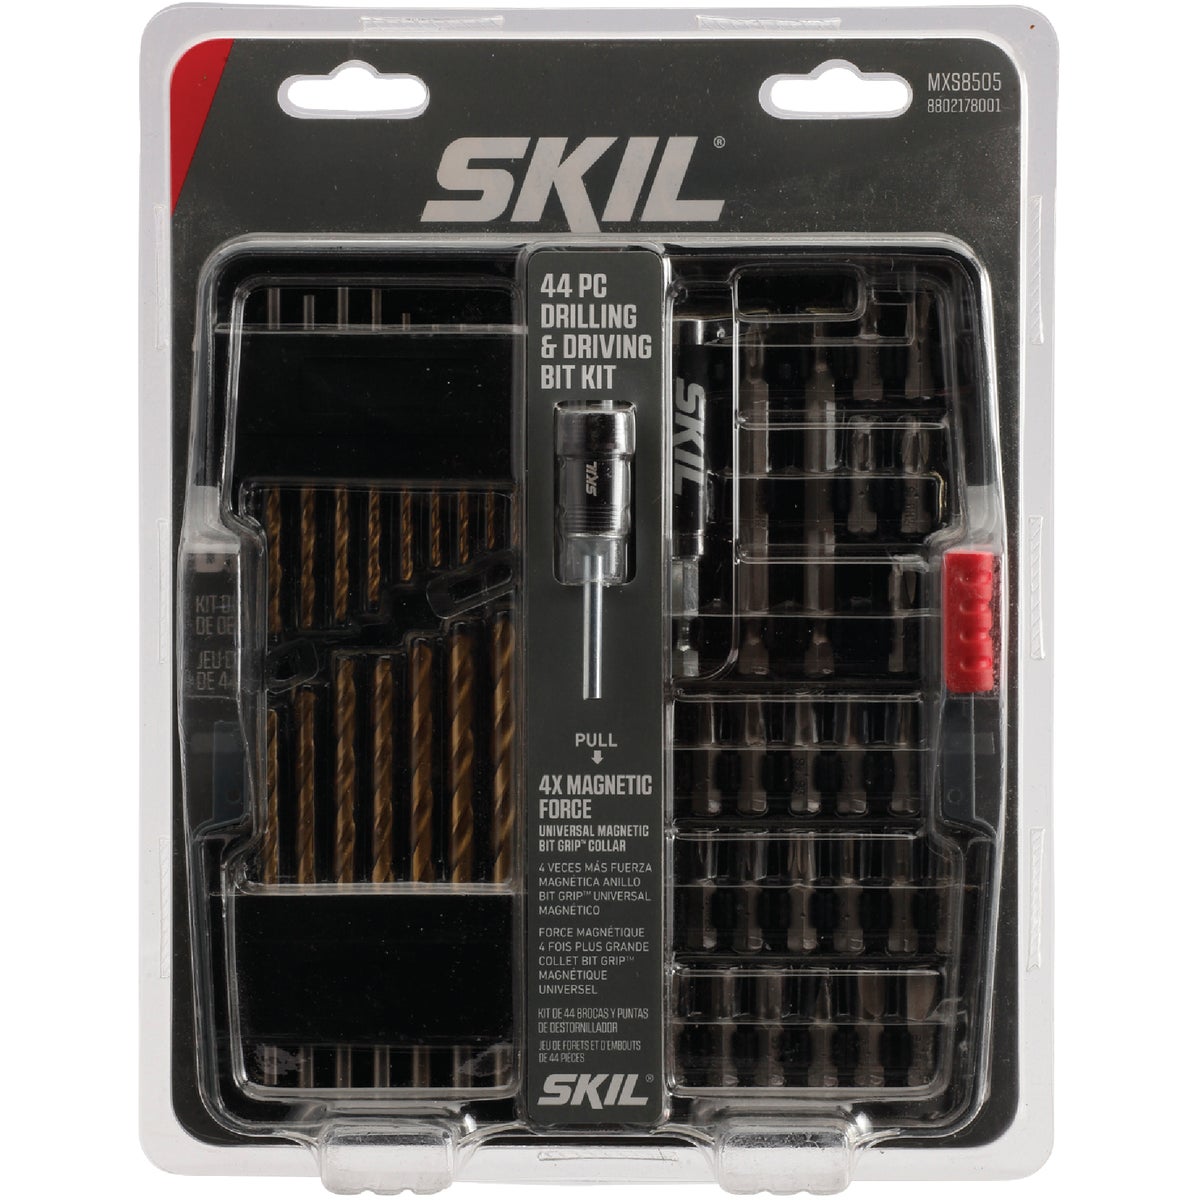 SKIL 44-Piece Drill and Drive Set with Bit Grip Magnetic Bit Collar